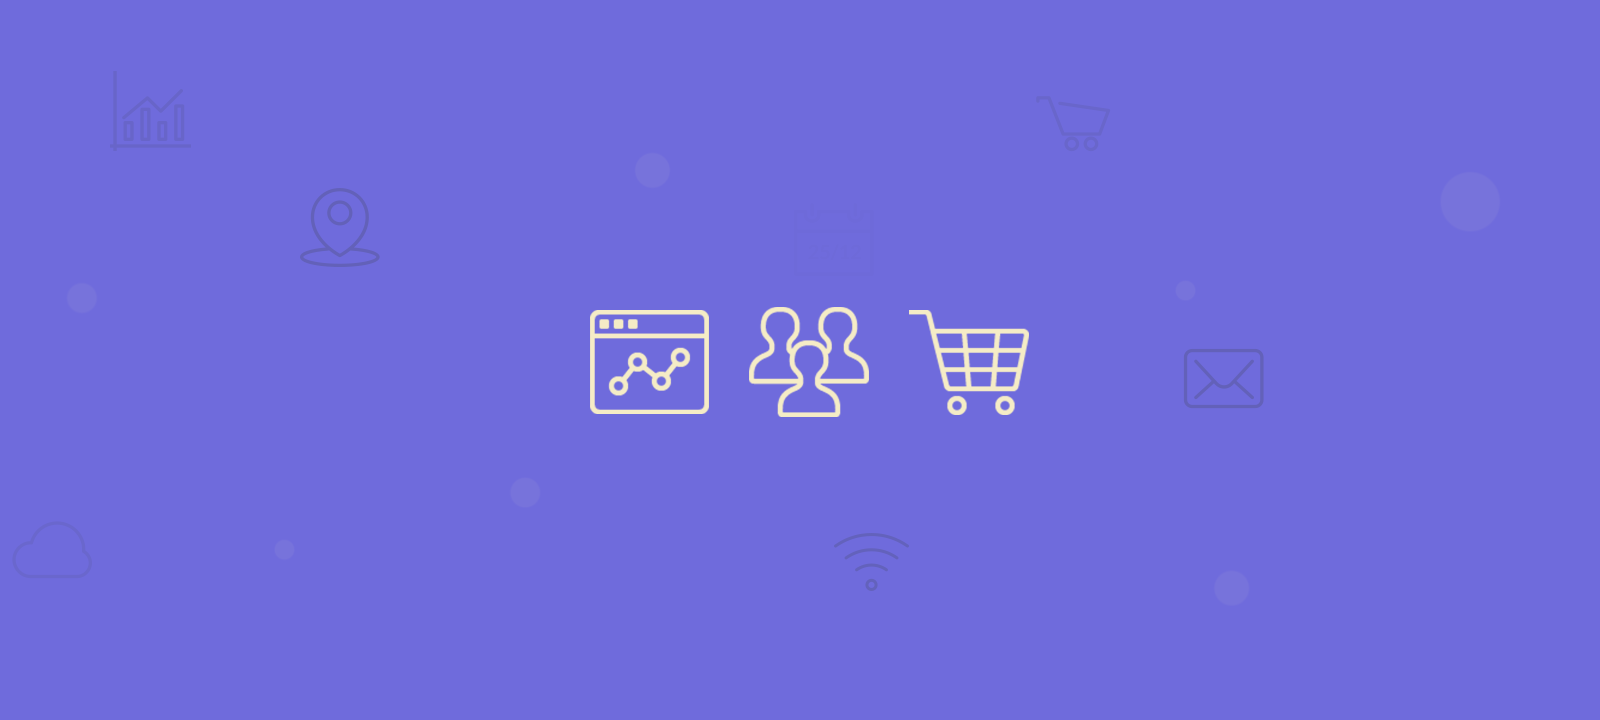 woocommerce conversion rate